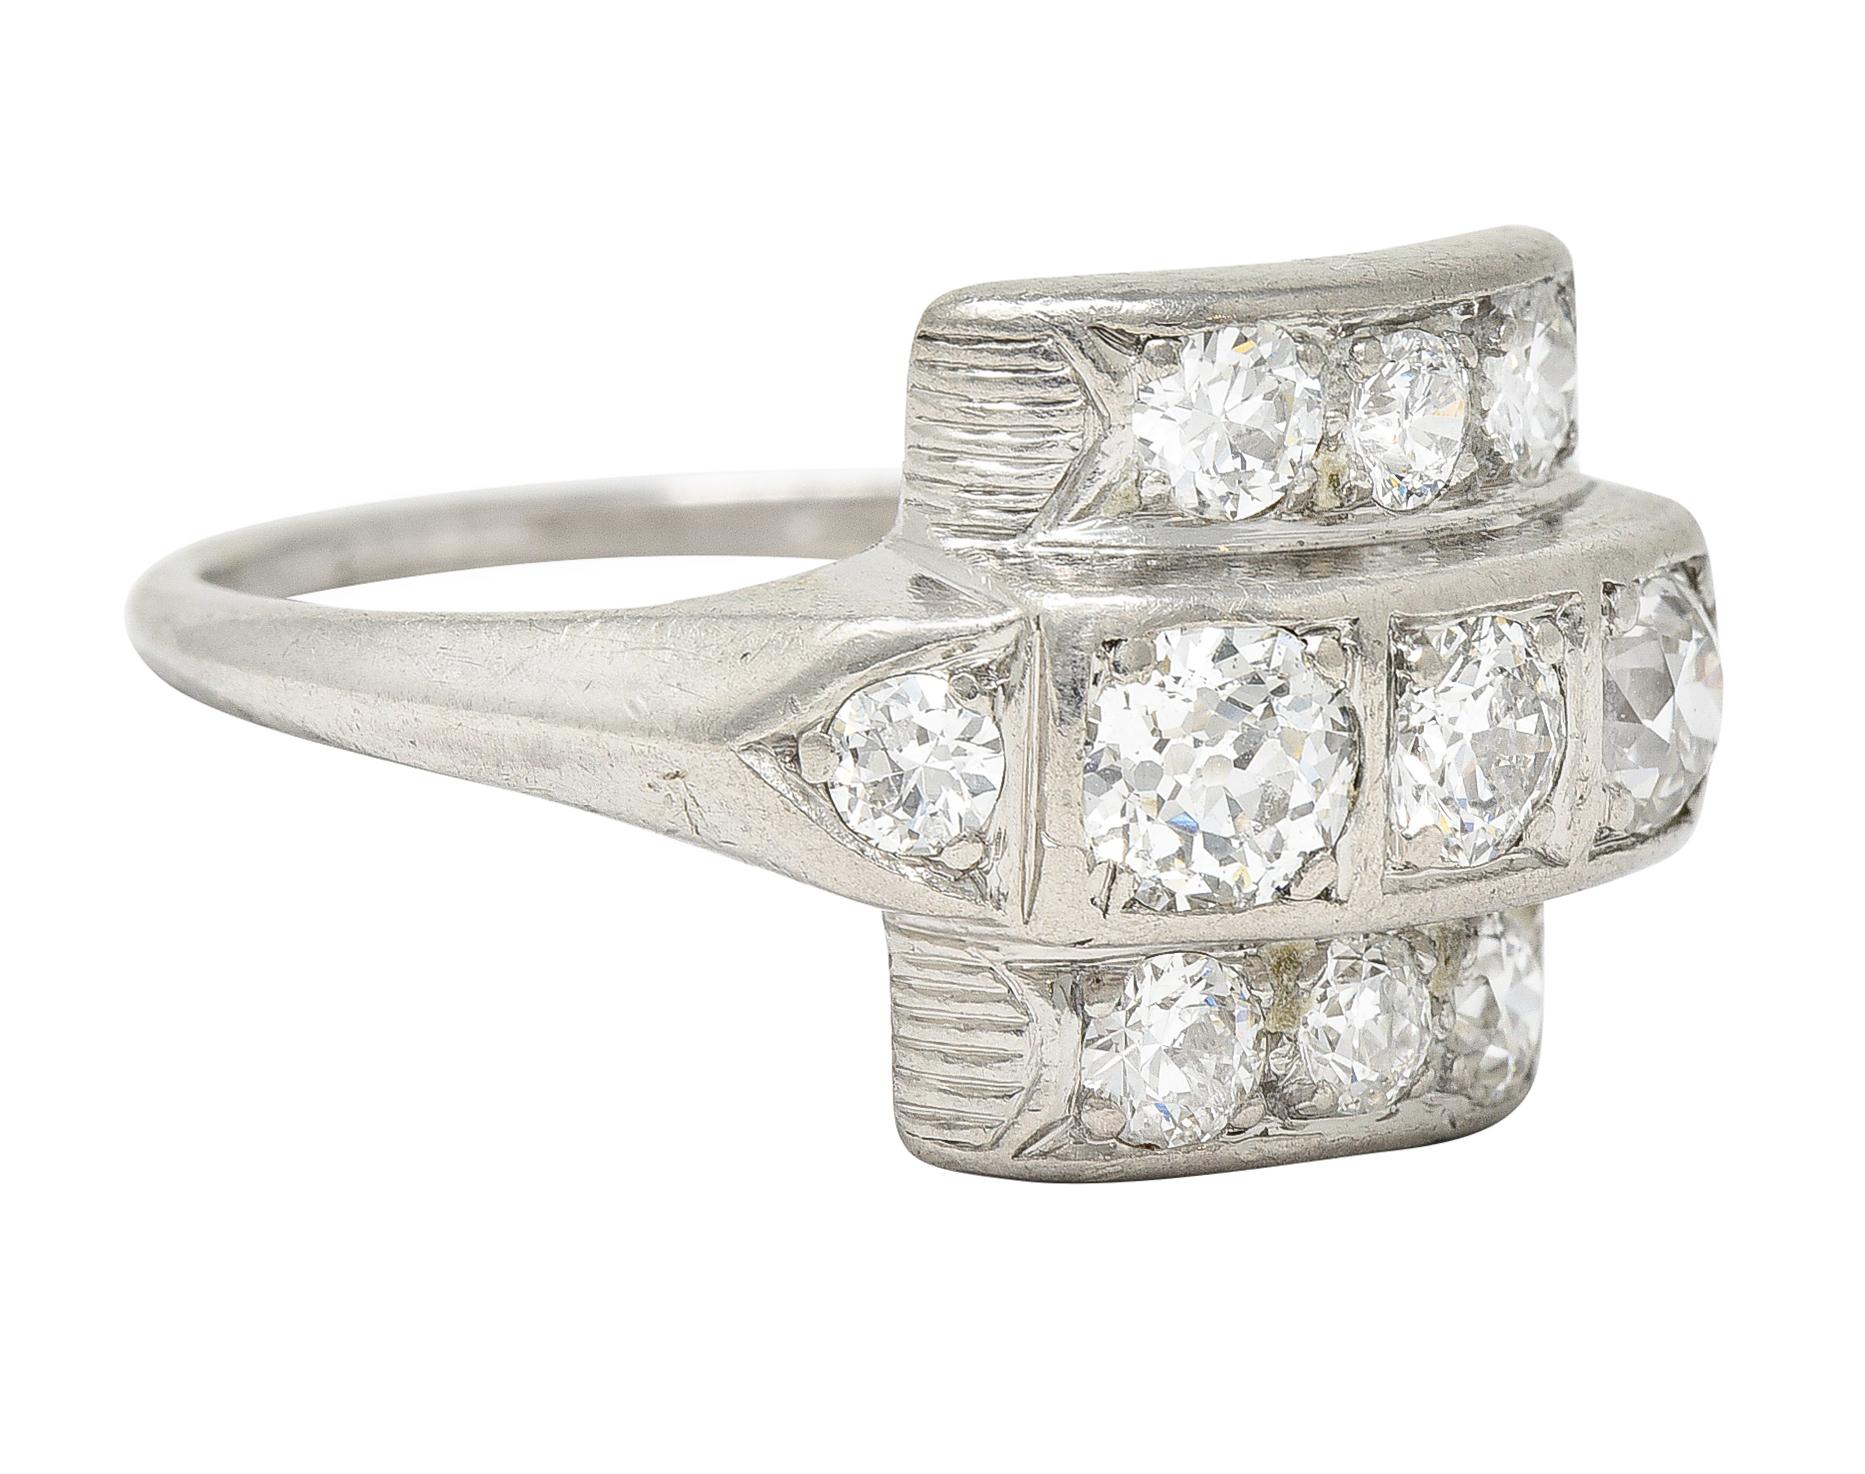 Dinner ring is designed as a tiered square form with three rows of diamonds. Featuring old European cut and transitional cut diamonds. Weighing collectively approximately 1.00 carat - H/I color with SI clarity. Completed by pointed shoulders and a